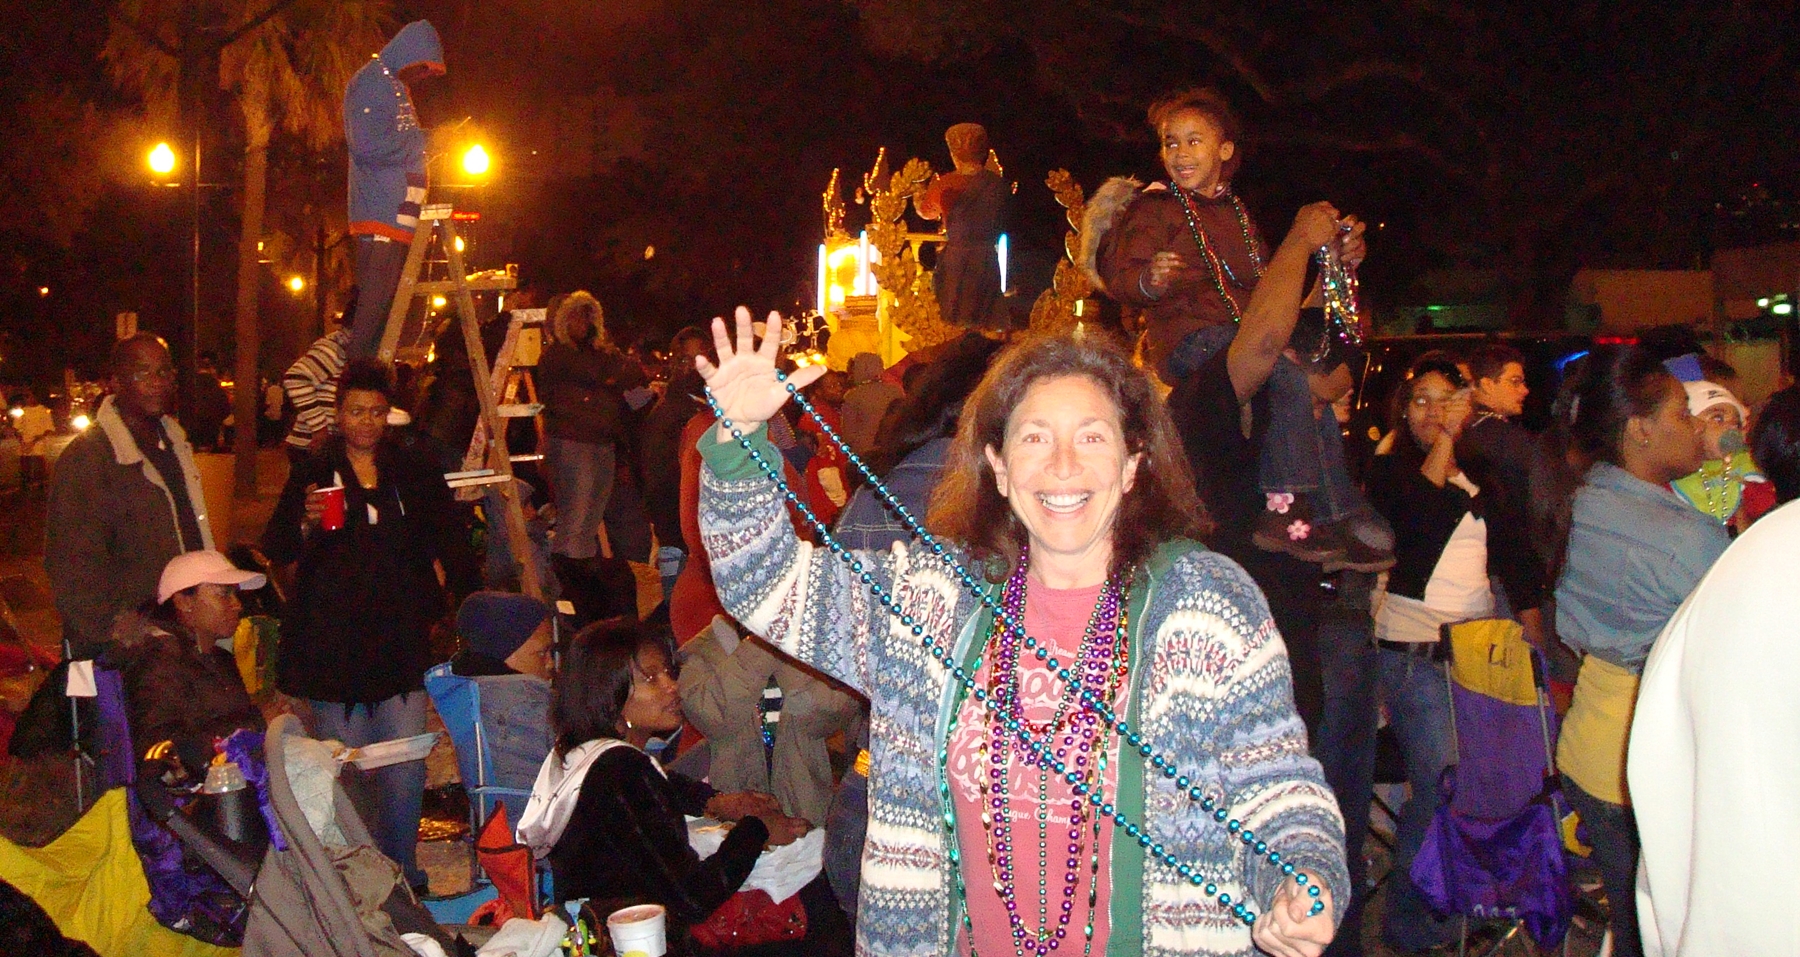 Totally psyched about catching beads from the Doobie Brothers float on Canal Street. Endymion Parade, Mardi Gras 2008